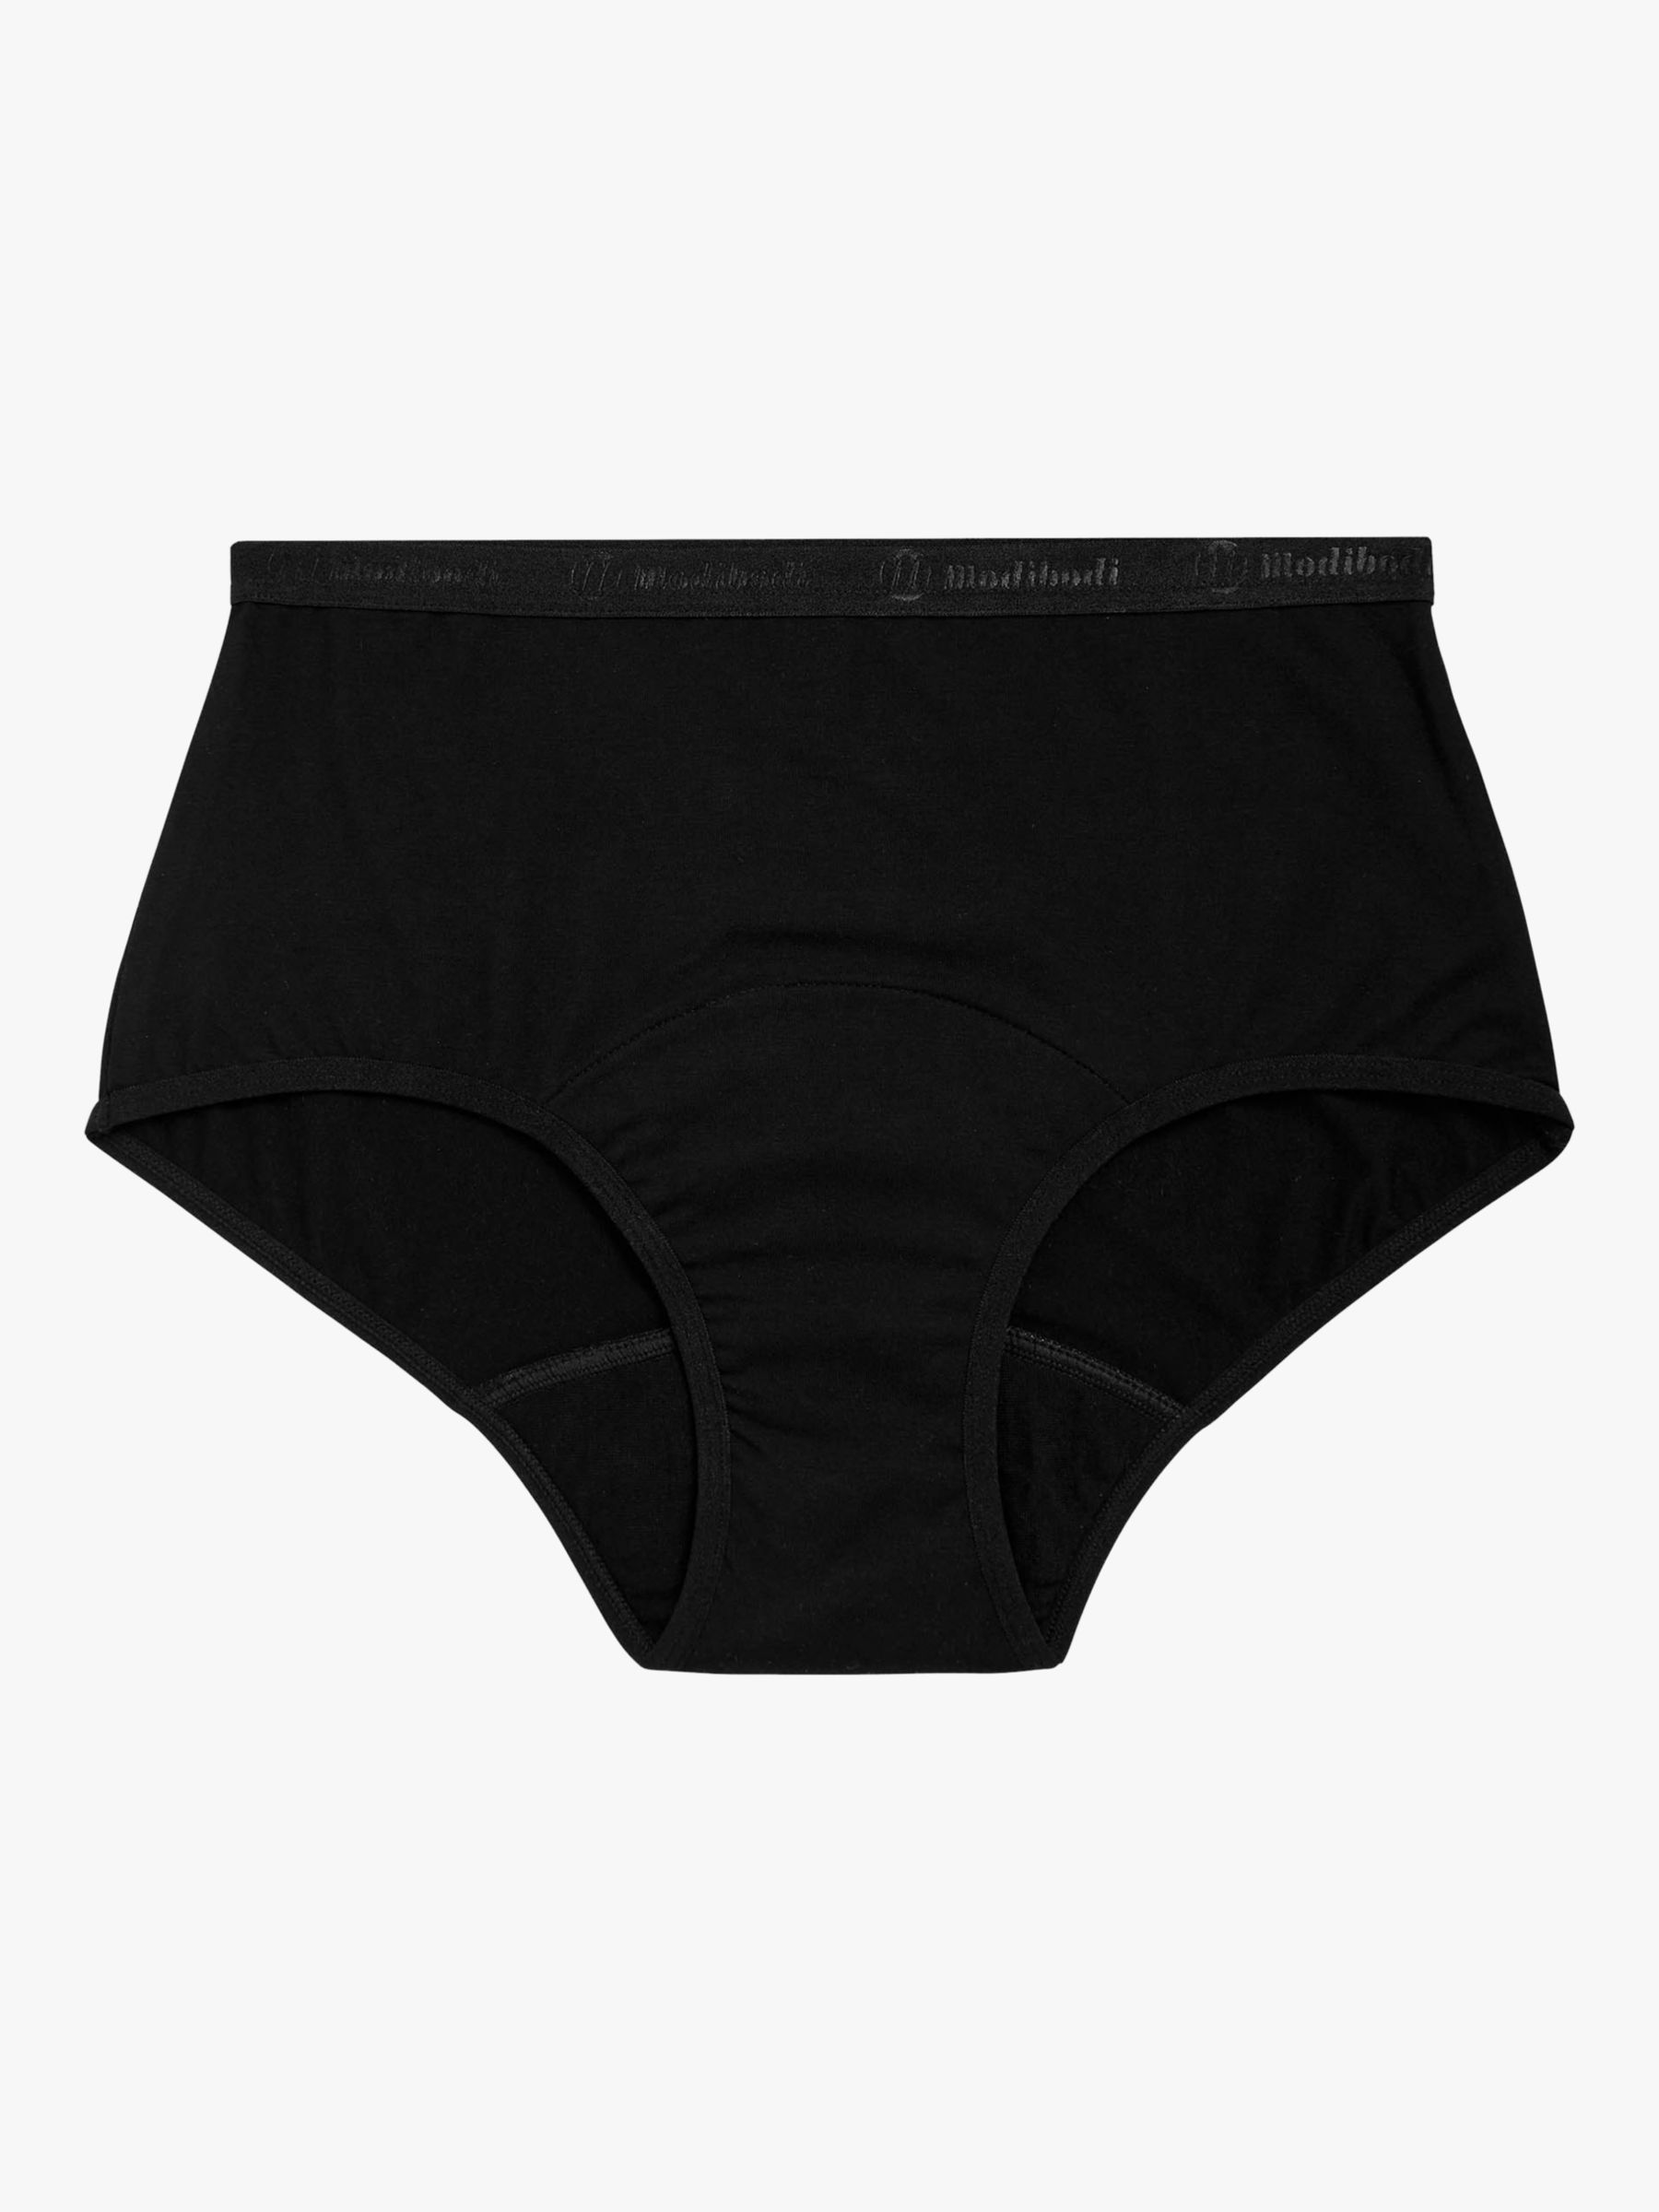 Buy Modibodi Mid-Rise Brief Light Moderate Size 16 1 pack